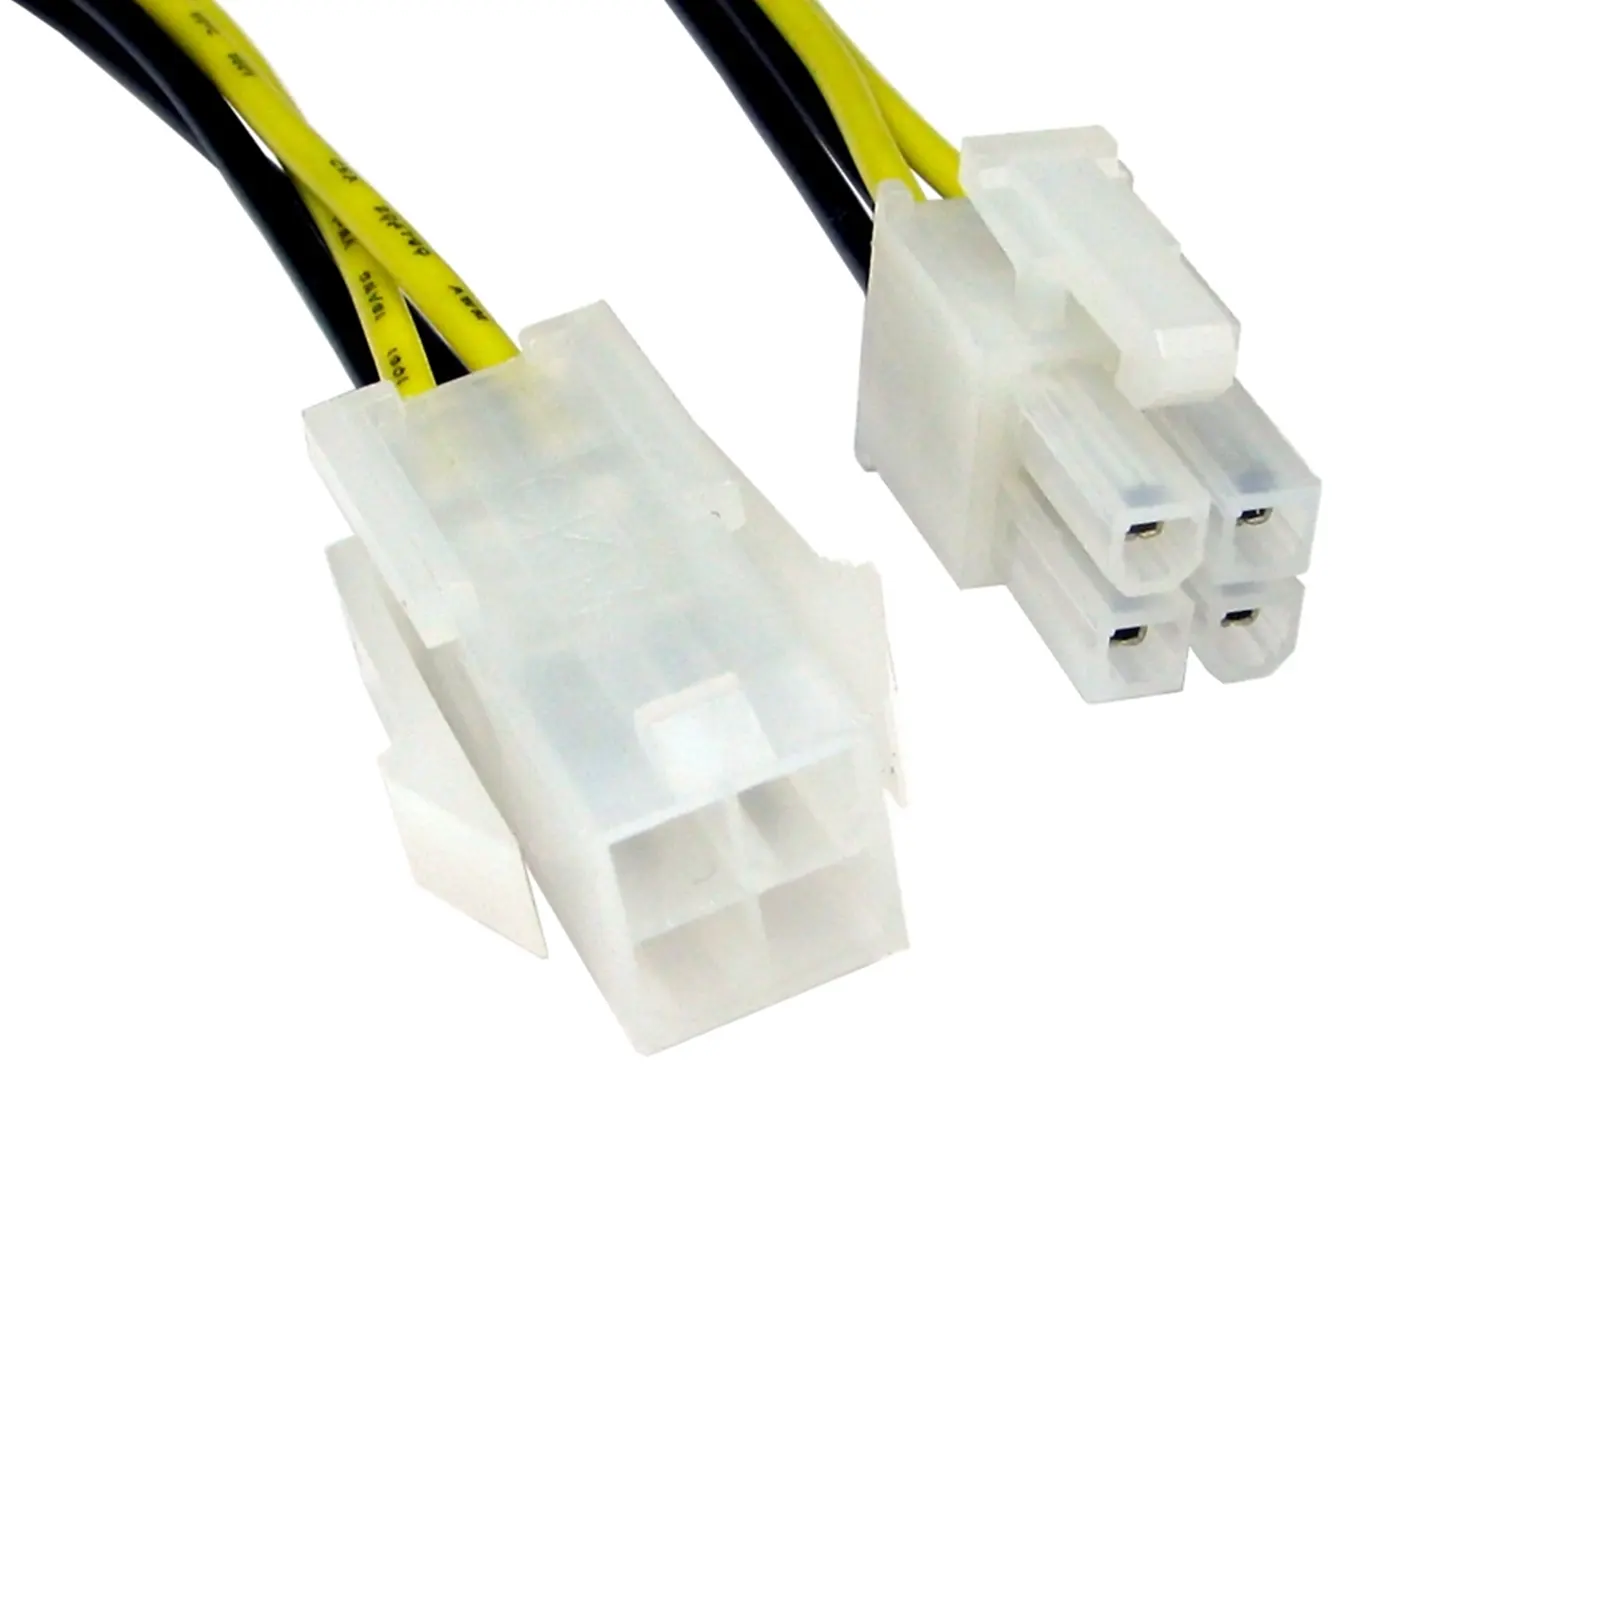 4-Pin ATX (M) to 4-Pin ATX (F) 0.28m Black and Yellow OEM Internal Extension Cable